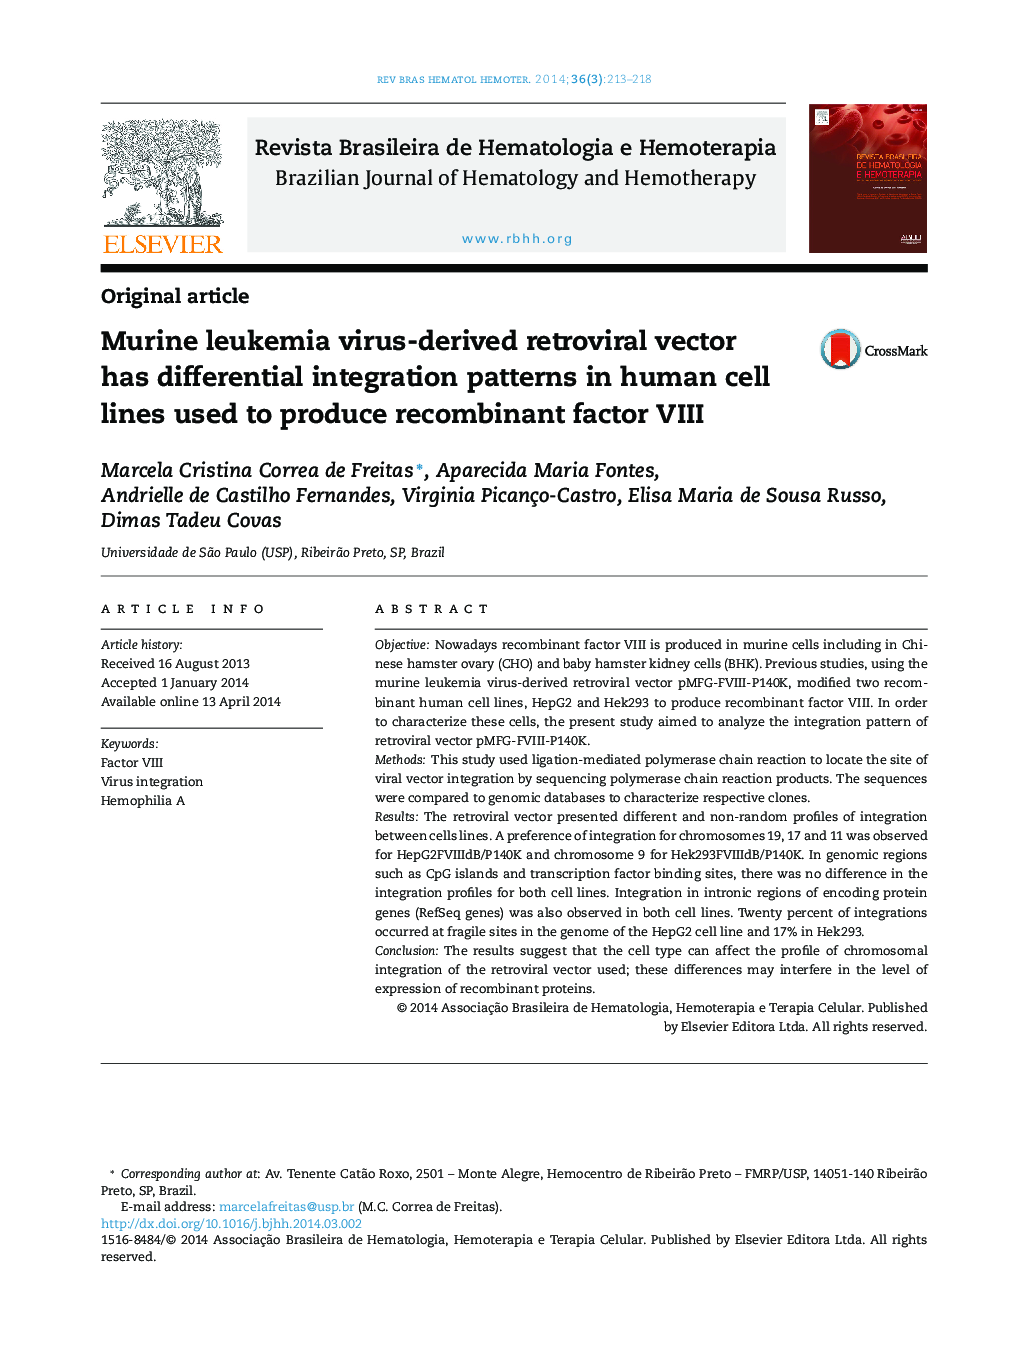 Murine leukemia virus-derived retroviral vector has differential integration patterns in human cell lines used to produce recombinant factor VIII